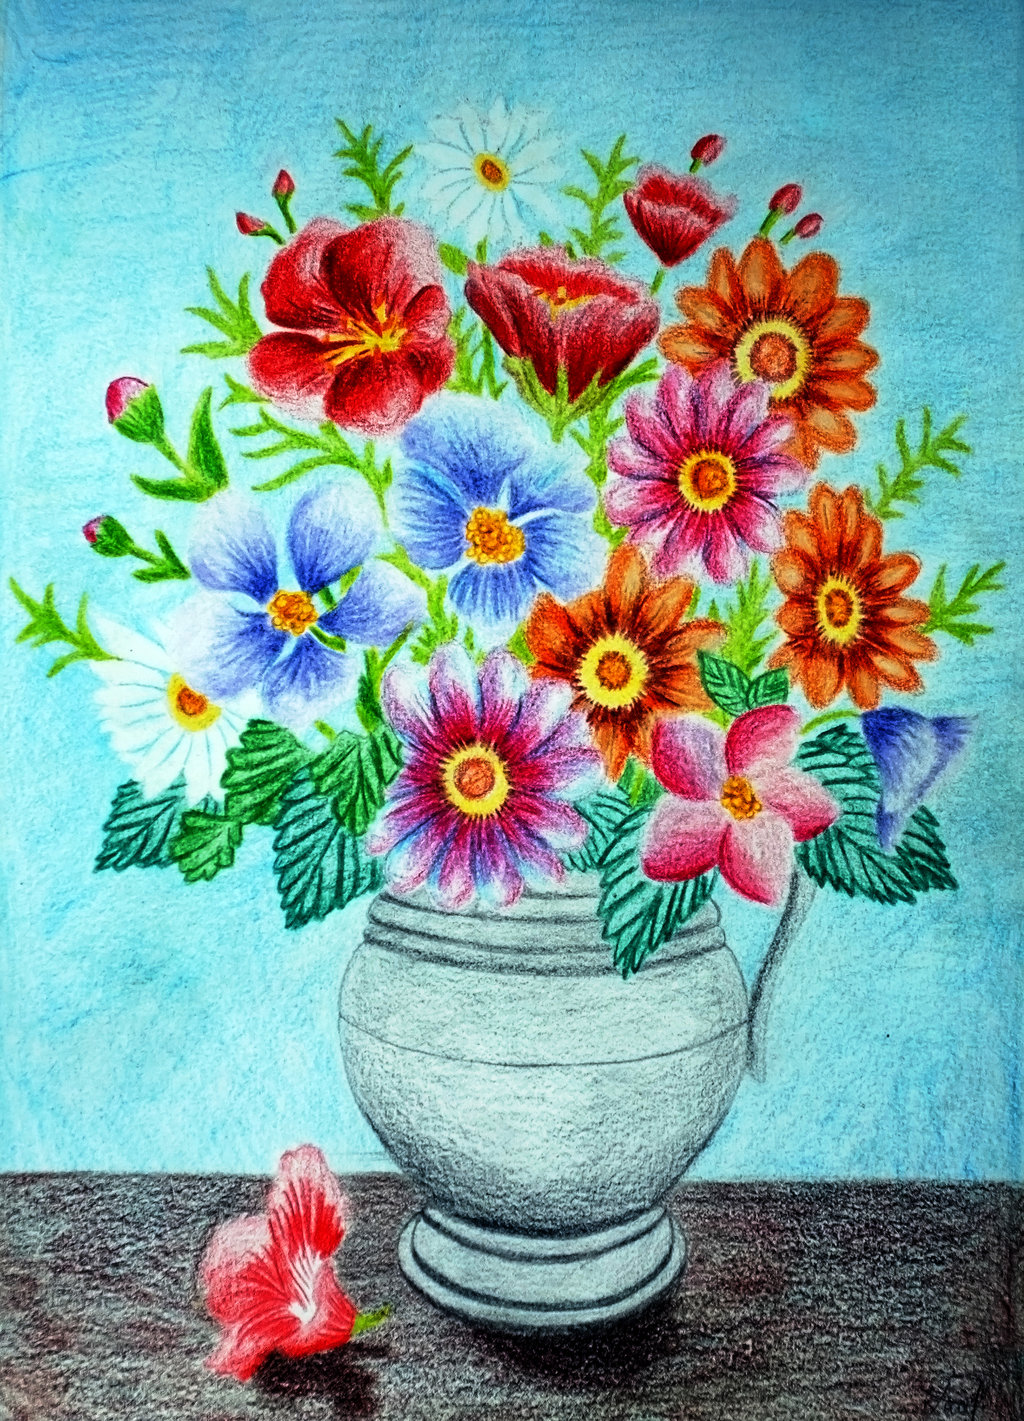 The Artistic Process Of Creating Vase With Flowers Drawings